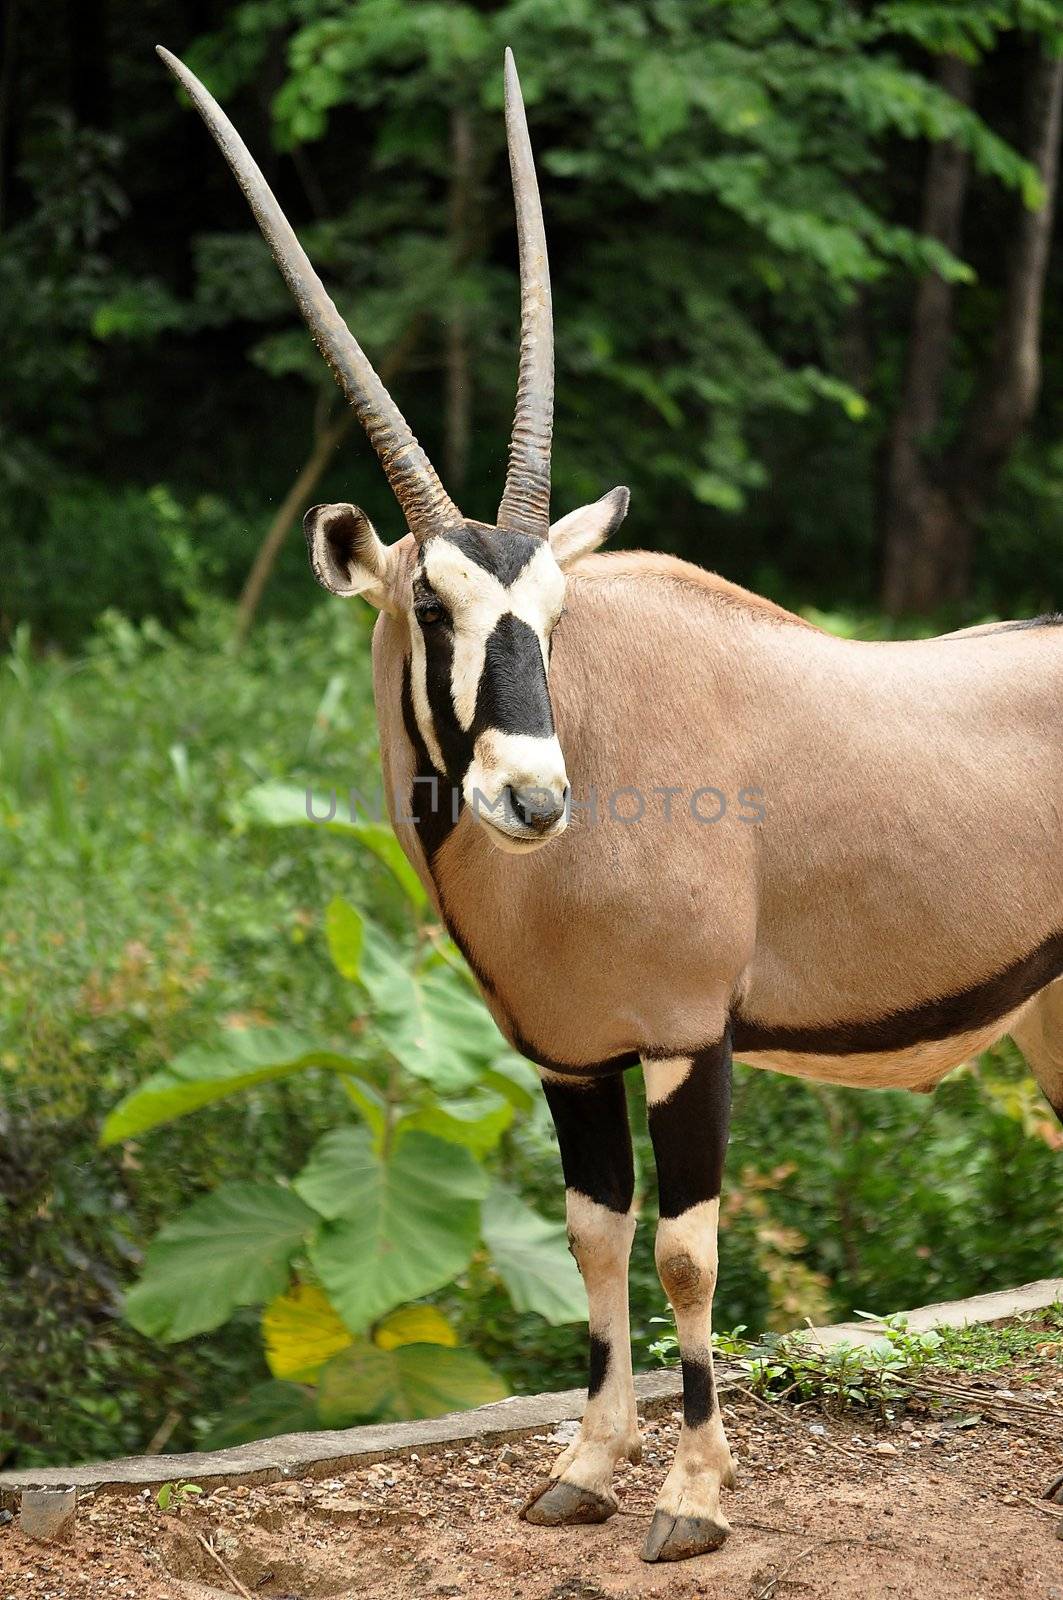 East African Oryx by MaZiKab